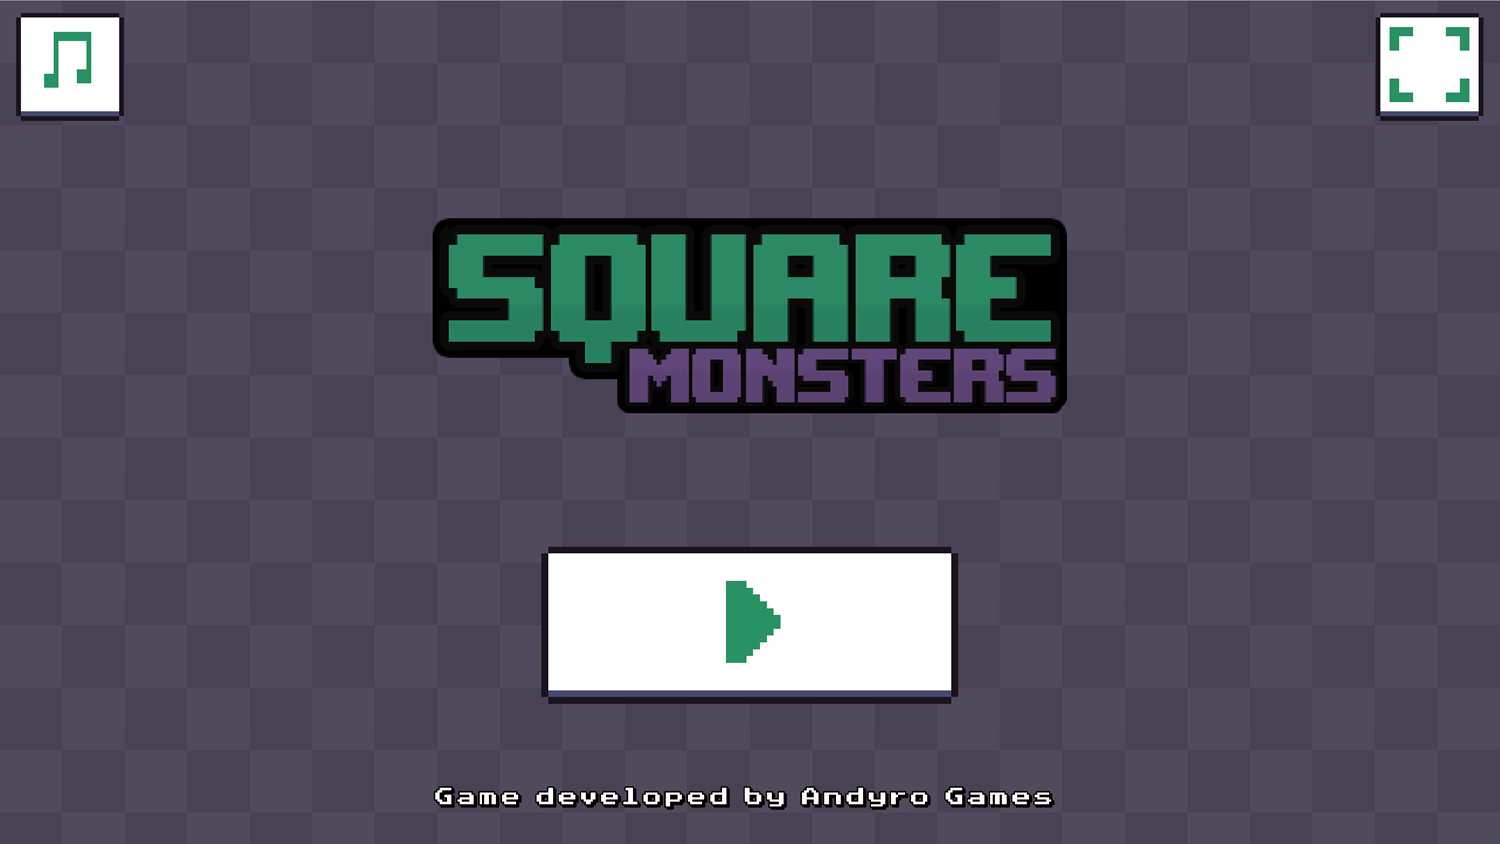 Square Monsters Game Welcome Screen Screenshot.